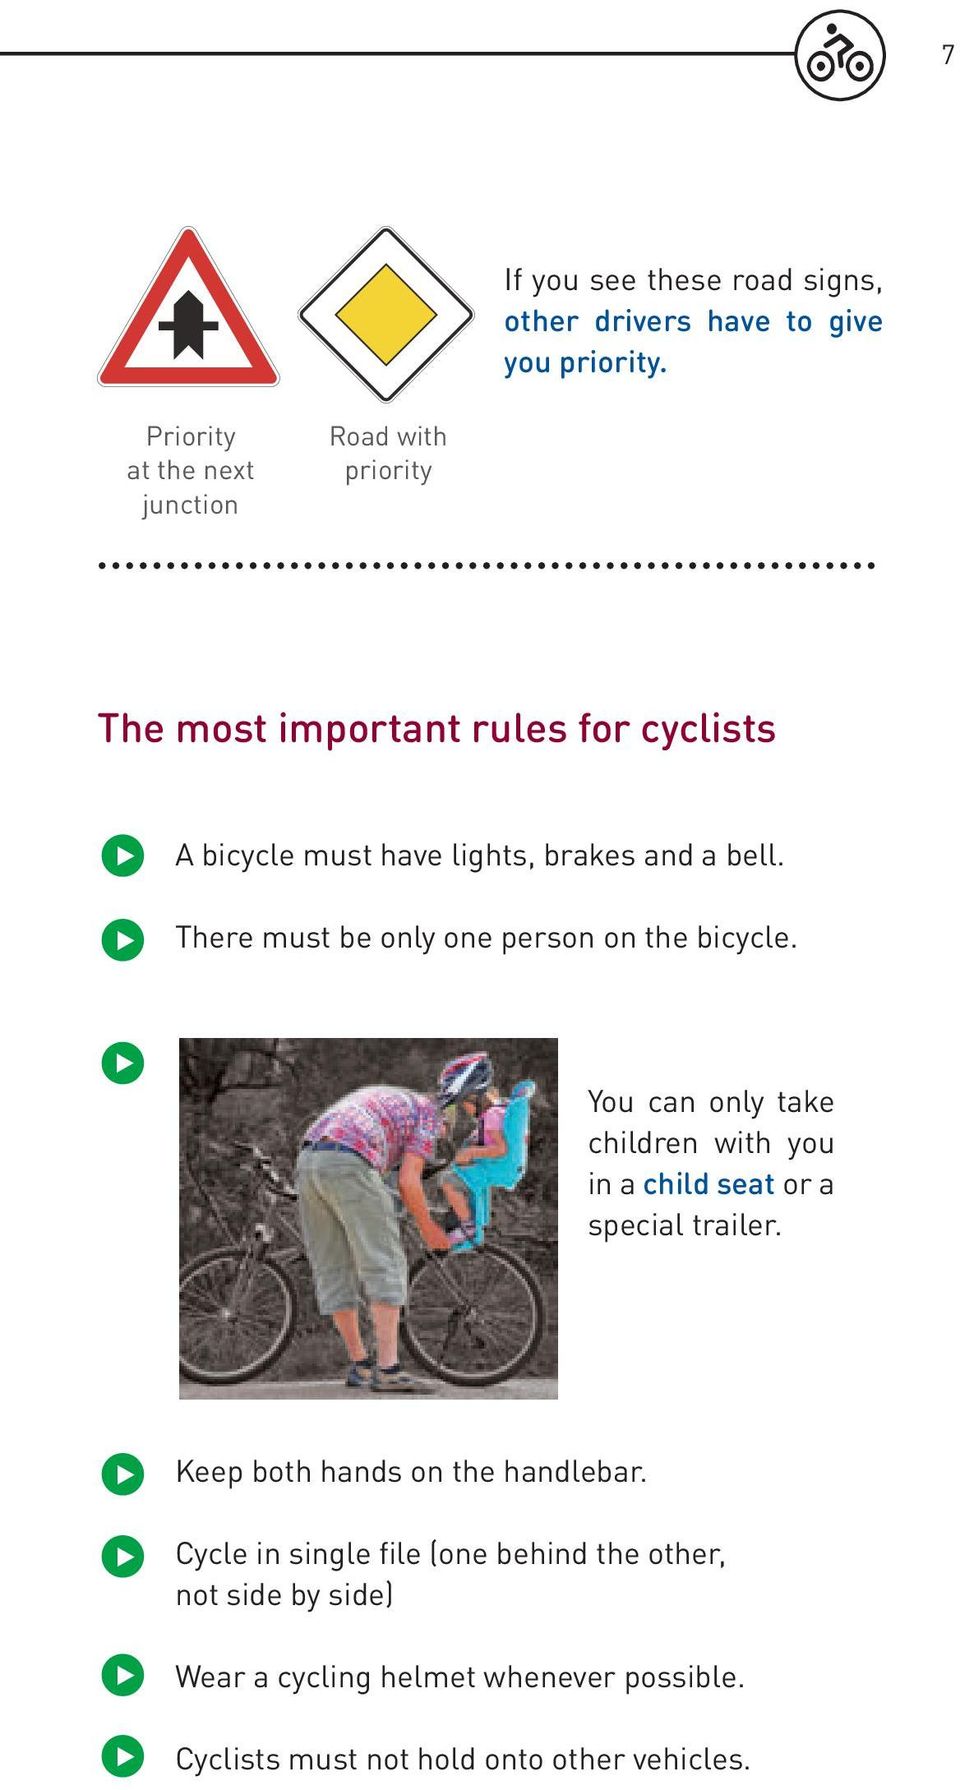 a bell. There must be only one person on the bicycle. You can only take children with you in a child seat or a special trailer.